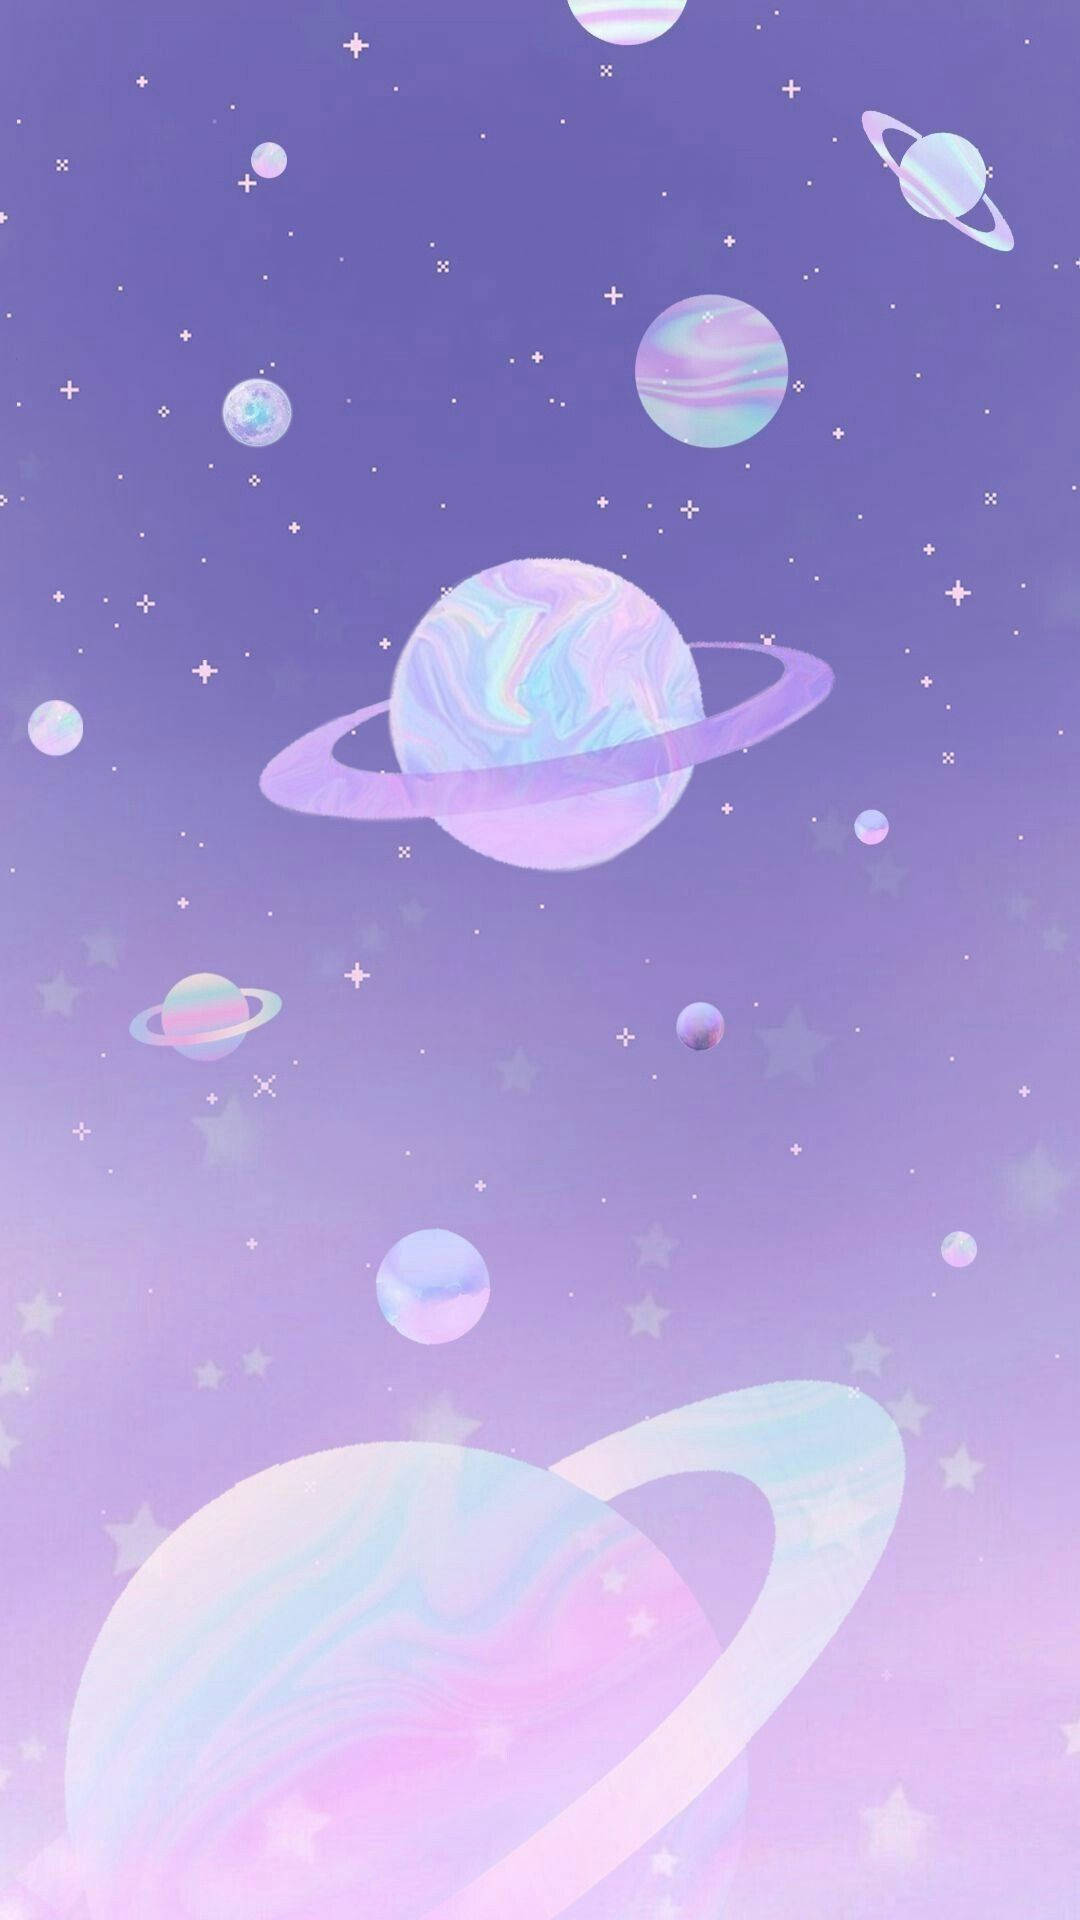 Download Cute Purple Planets Aesthetic Phone Wallpaper 